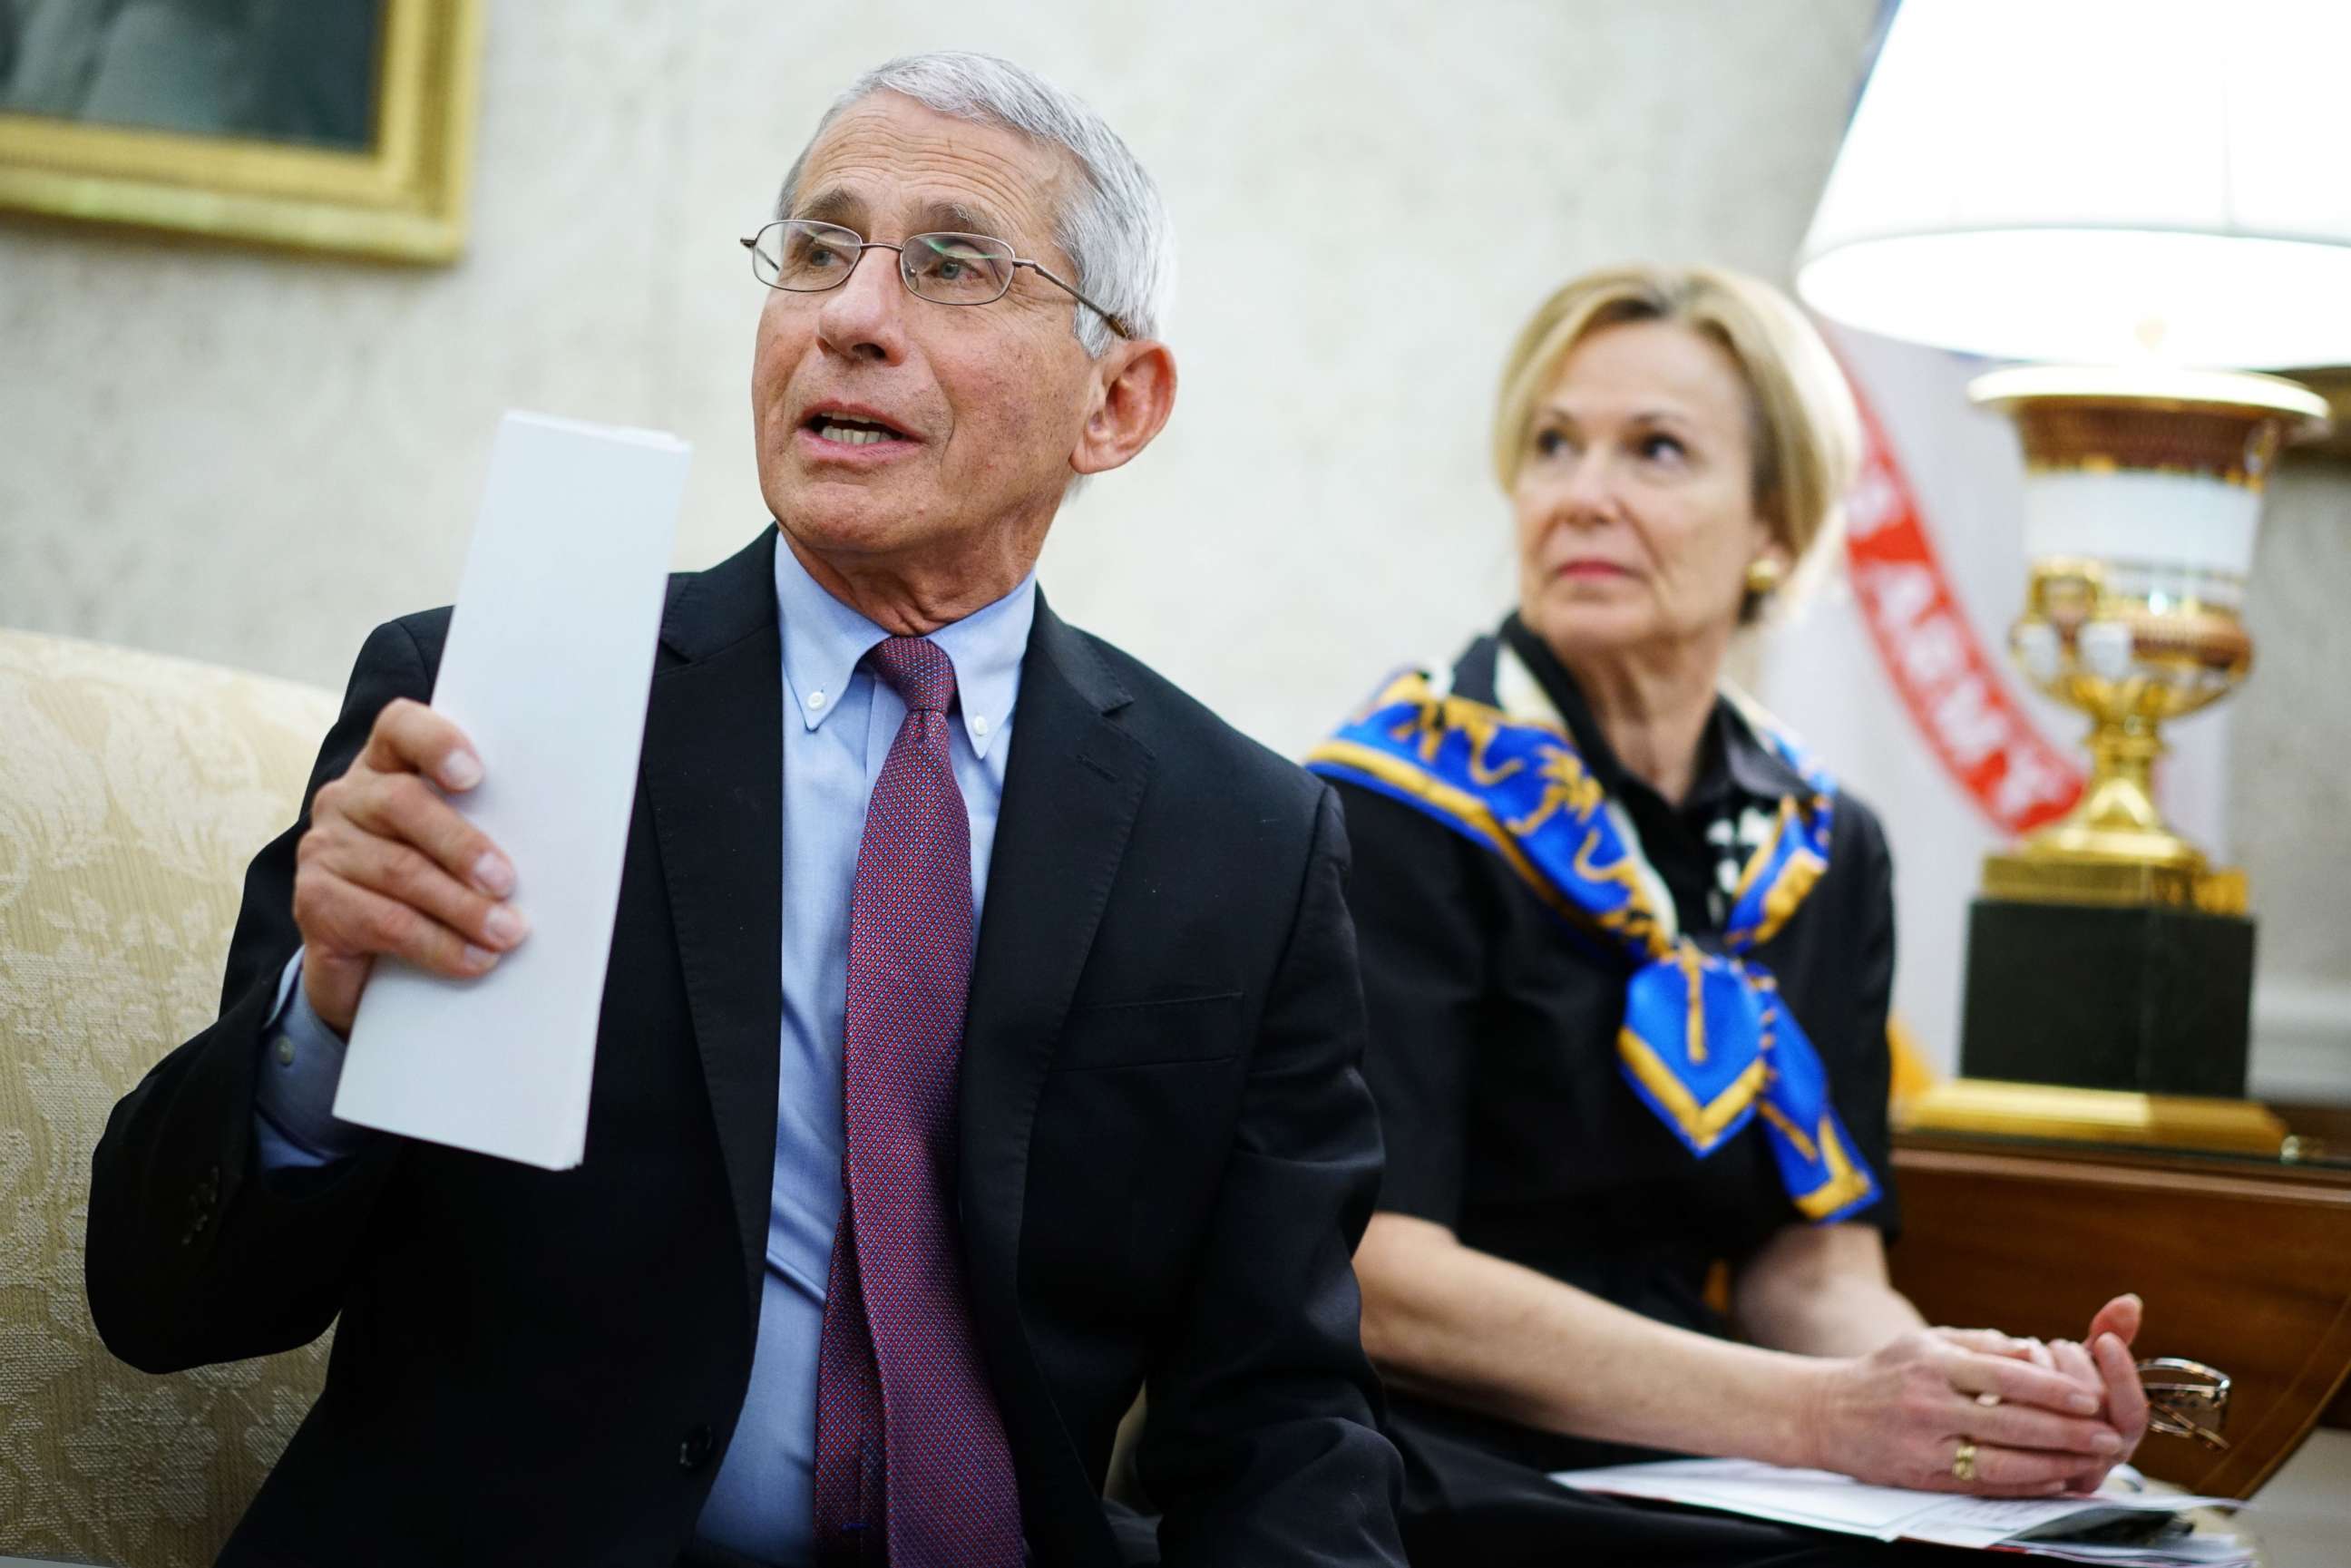 PHOTO: In this file photo taken on April 29, 2020, Dr. Anthony Fauci, director of the National Institute of Allergy and Infectious Diseases, speaks during a meeting with President Donald Trump in the Oval Office of the White House in Washington, D.C. 